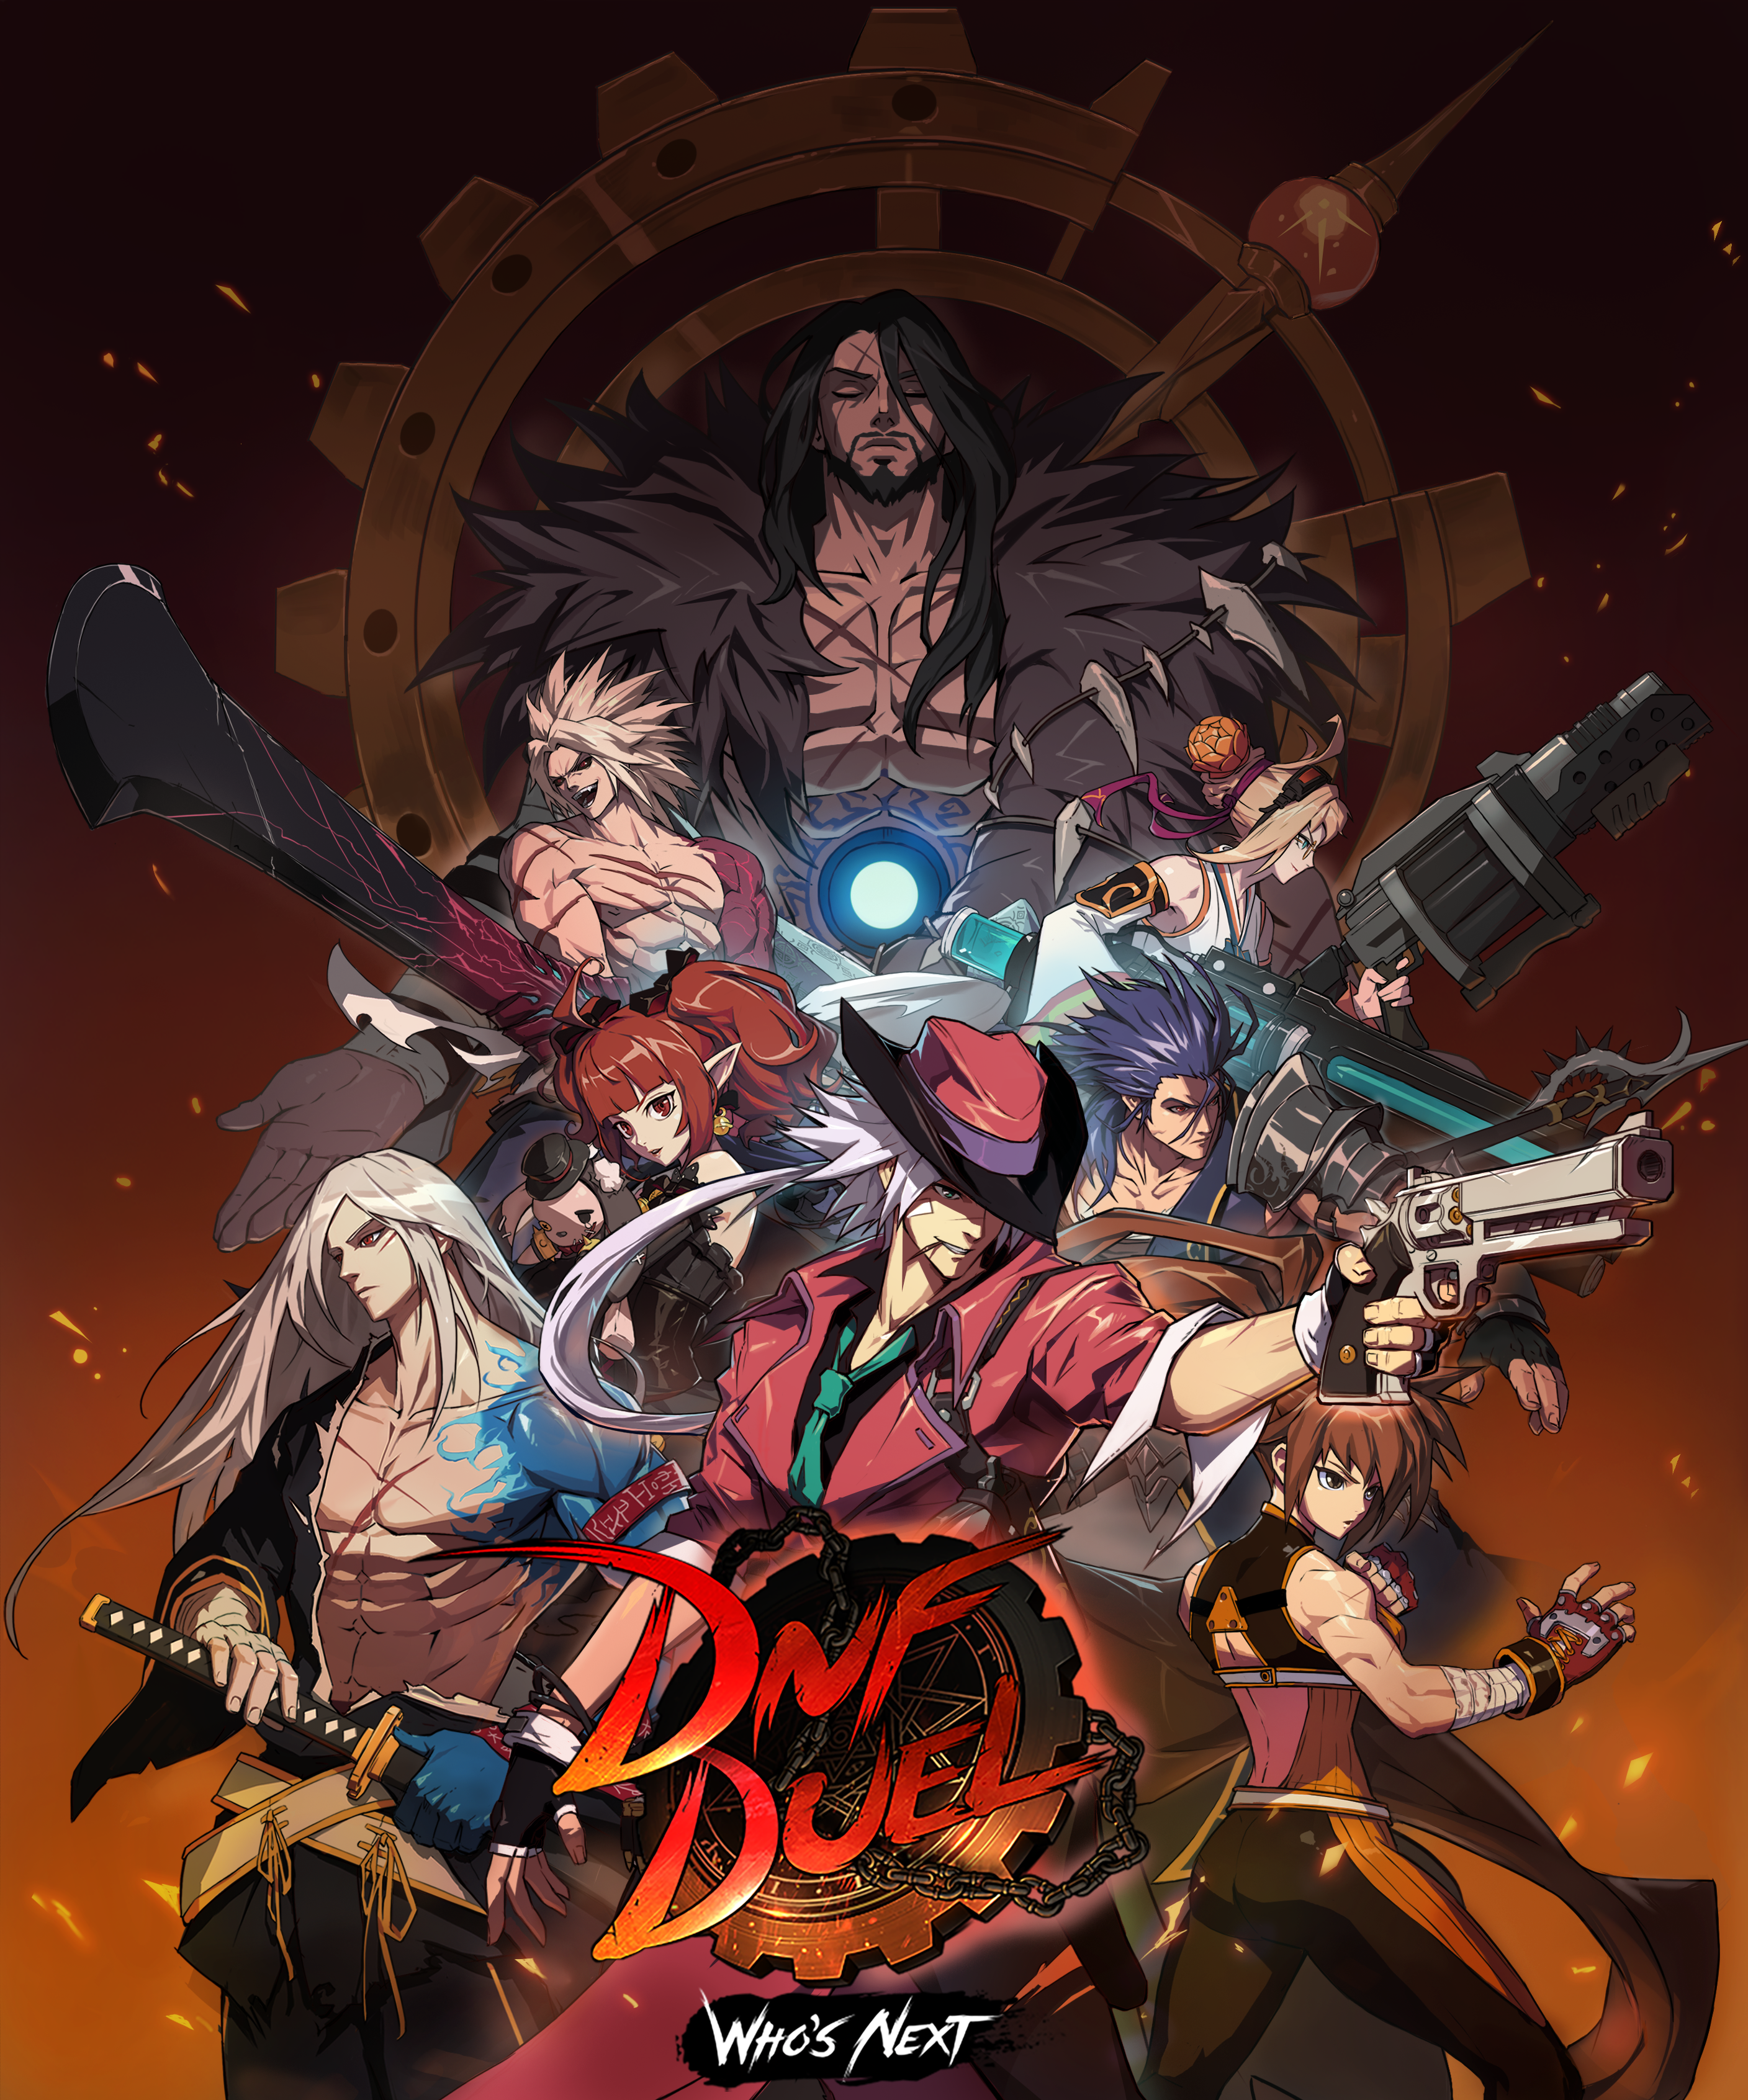 DNF Duel now available for Preorder!